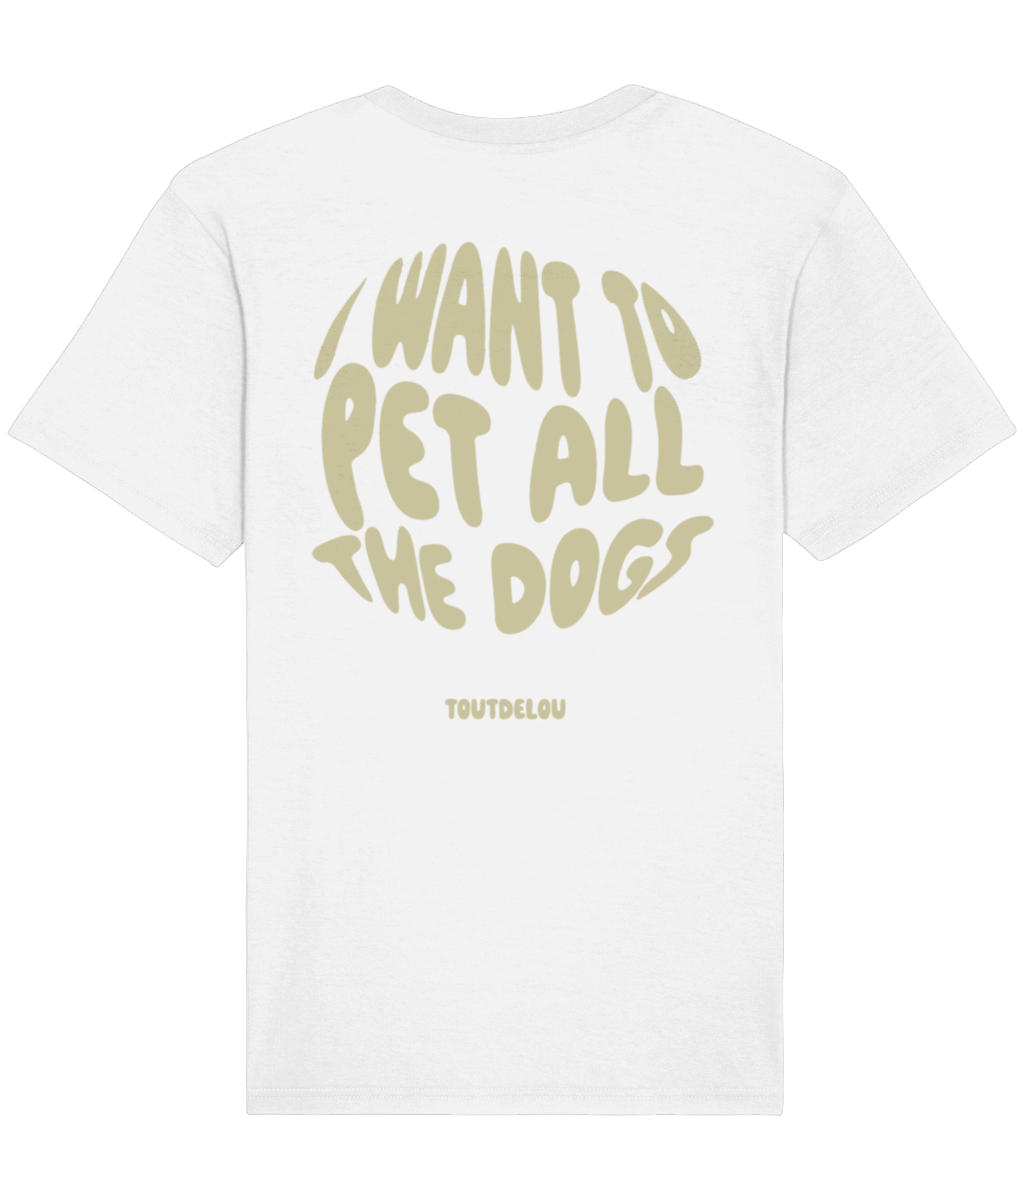 T-shirt white - pet all the dogs - olive - print on back